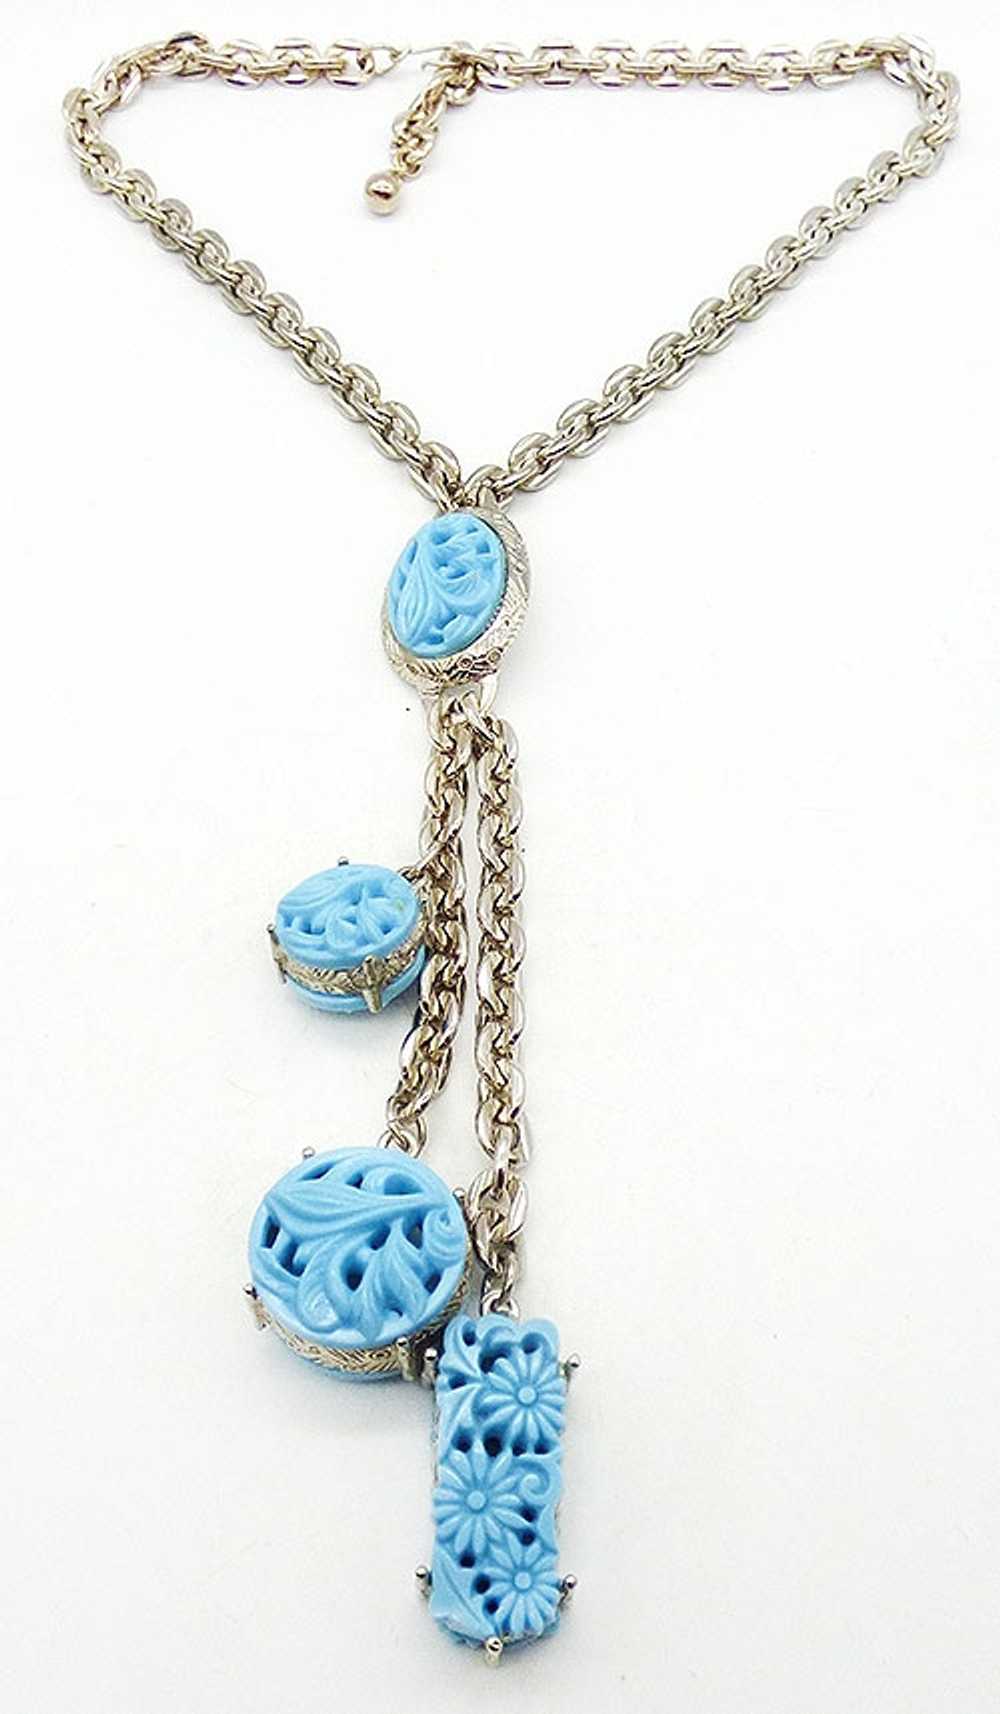 Selro Asian Motif Carved Turquoise Lariat Necklace - image 3